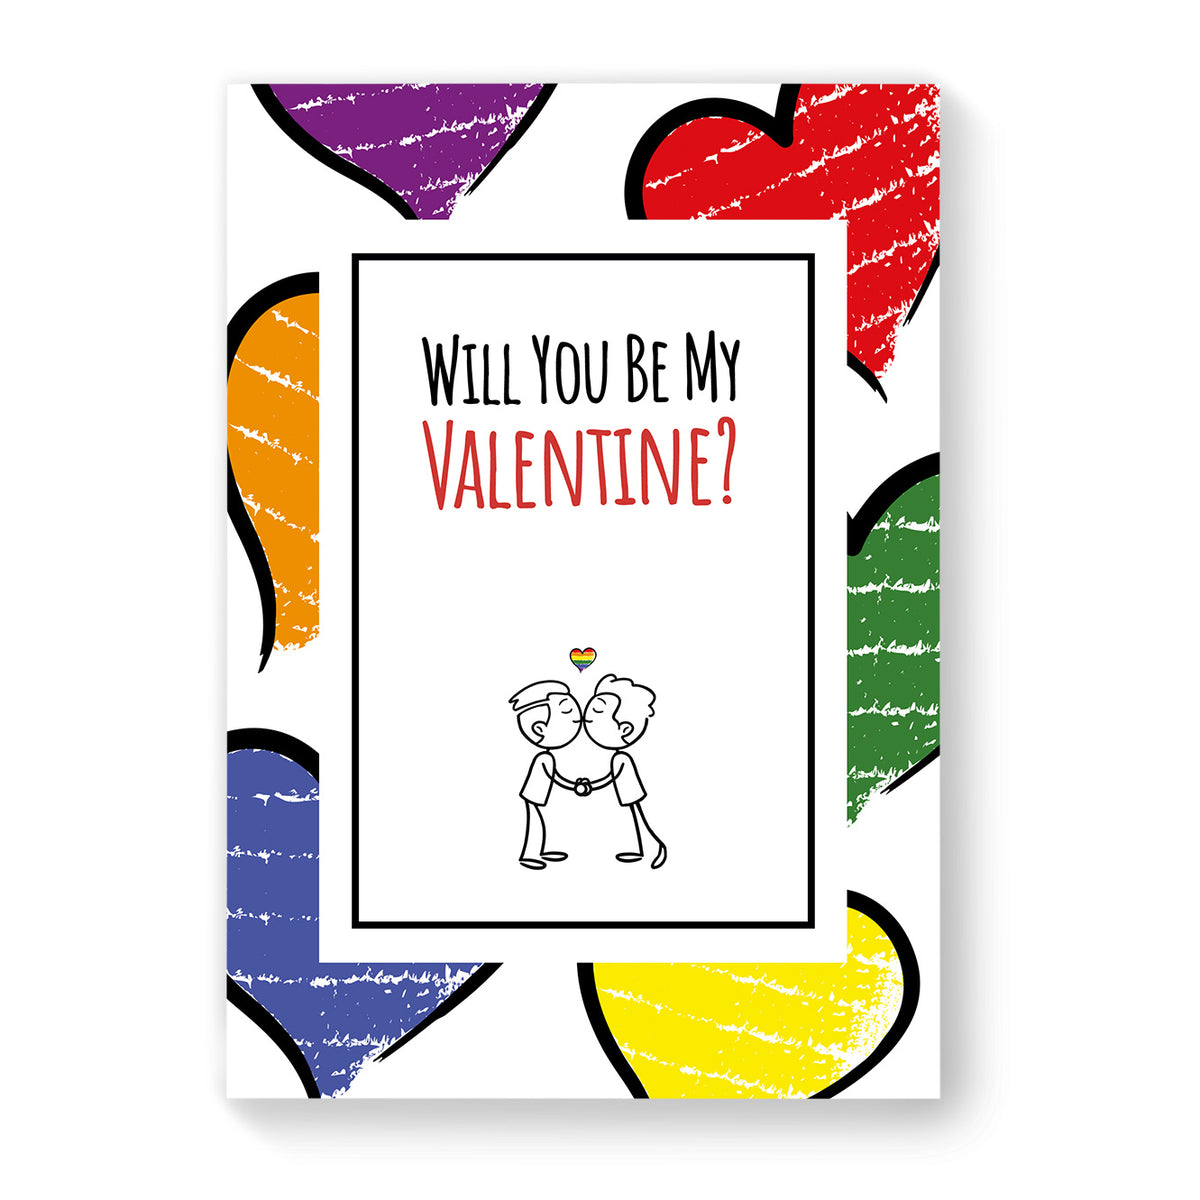 Will you be my Valentine - Gay Couple Card - Large Heart | Gift